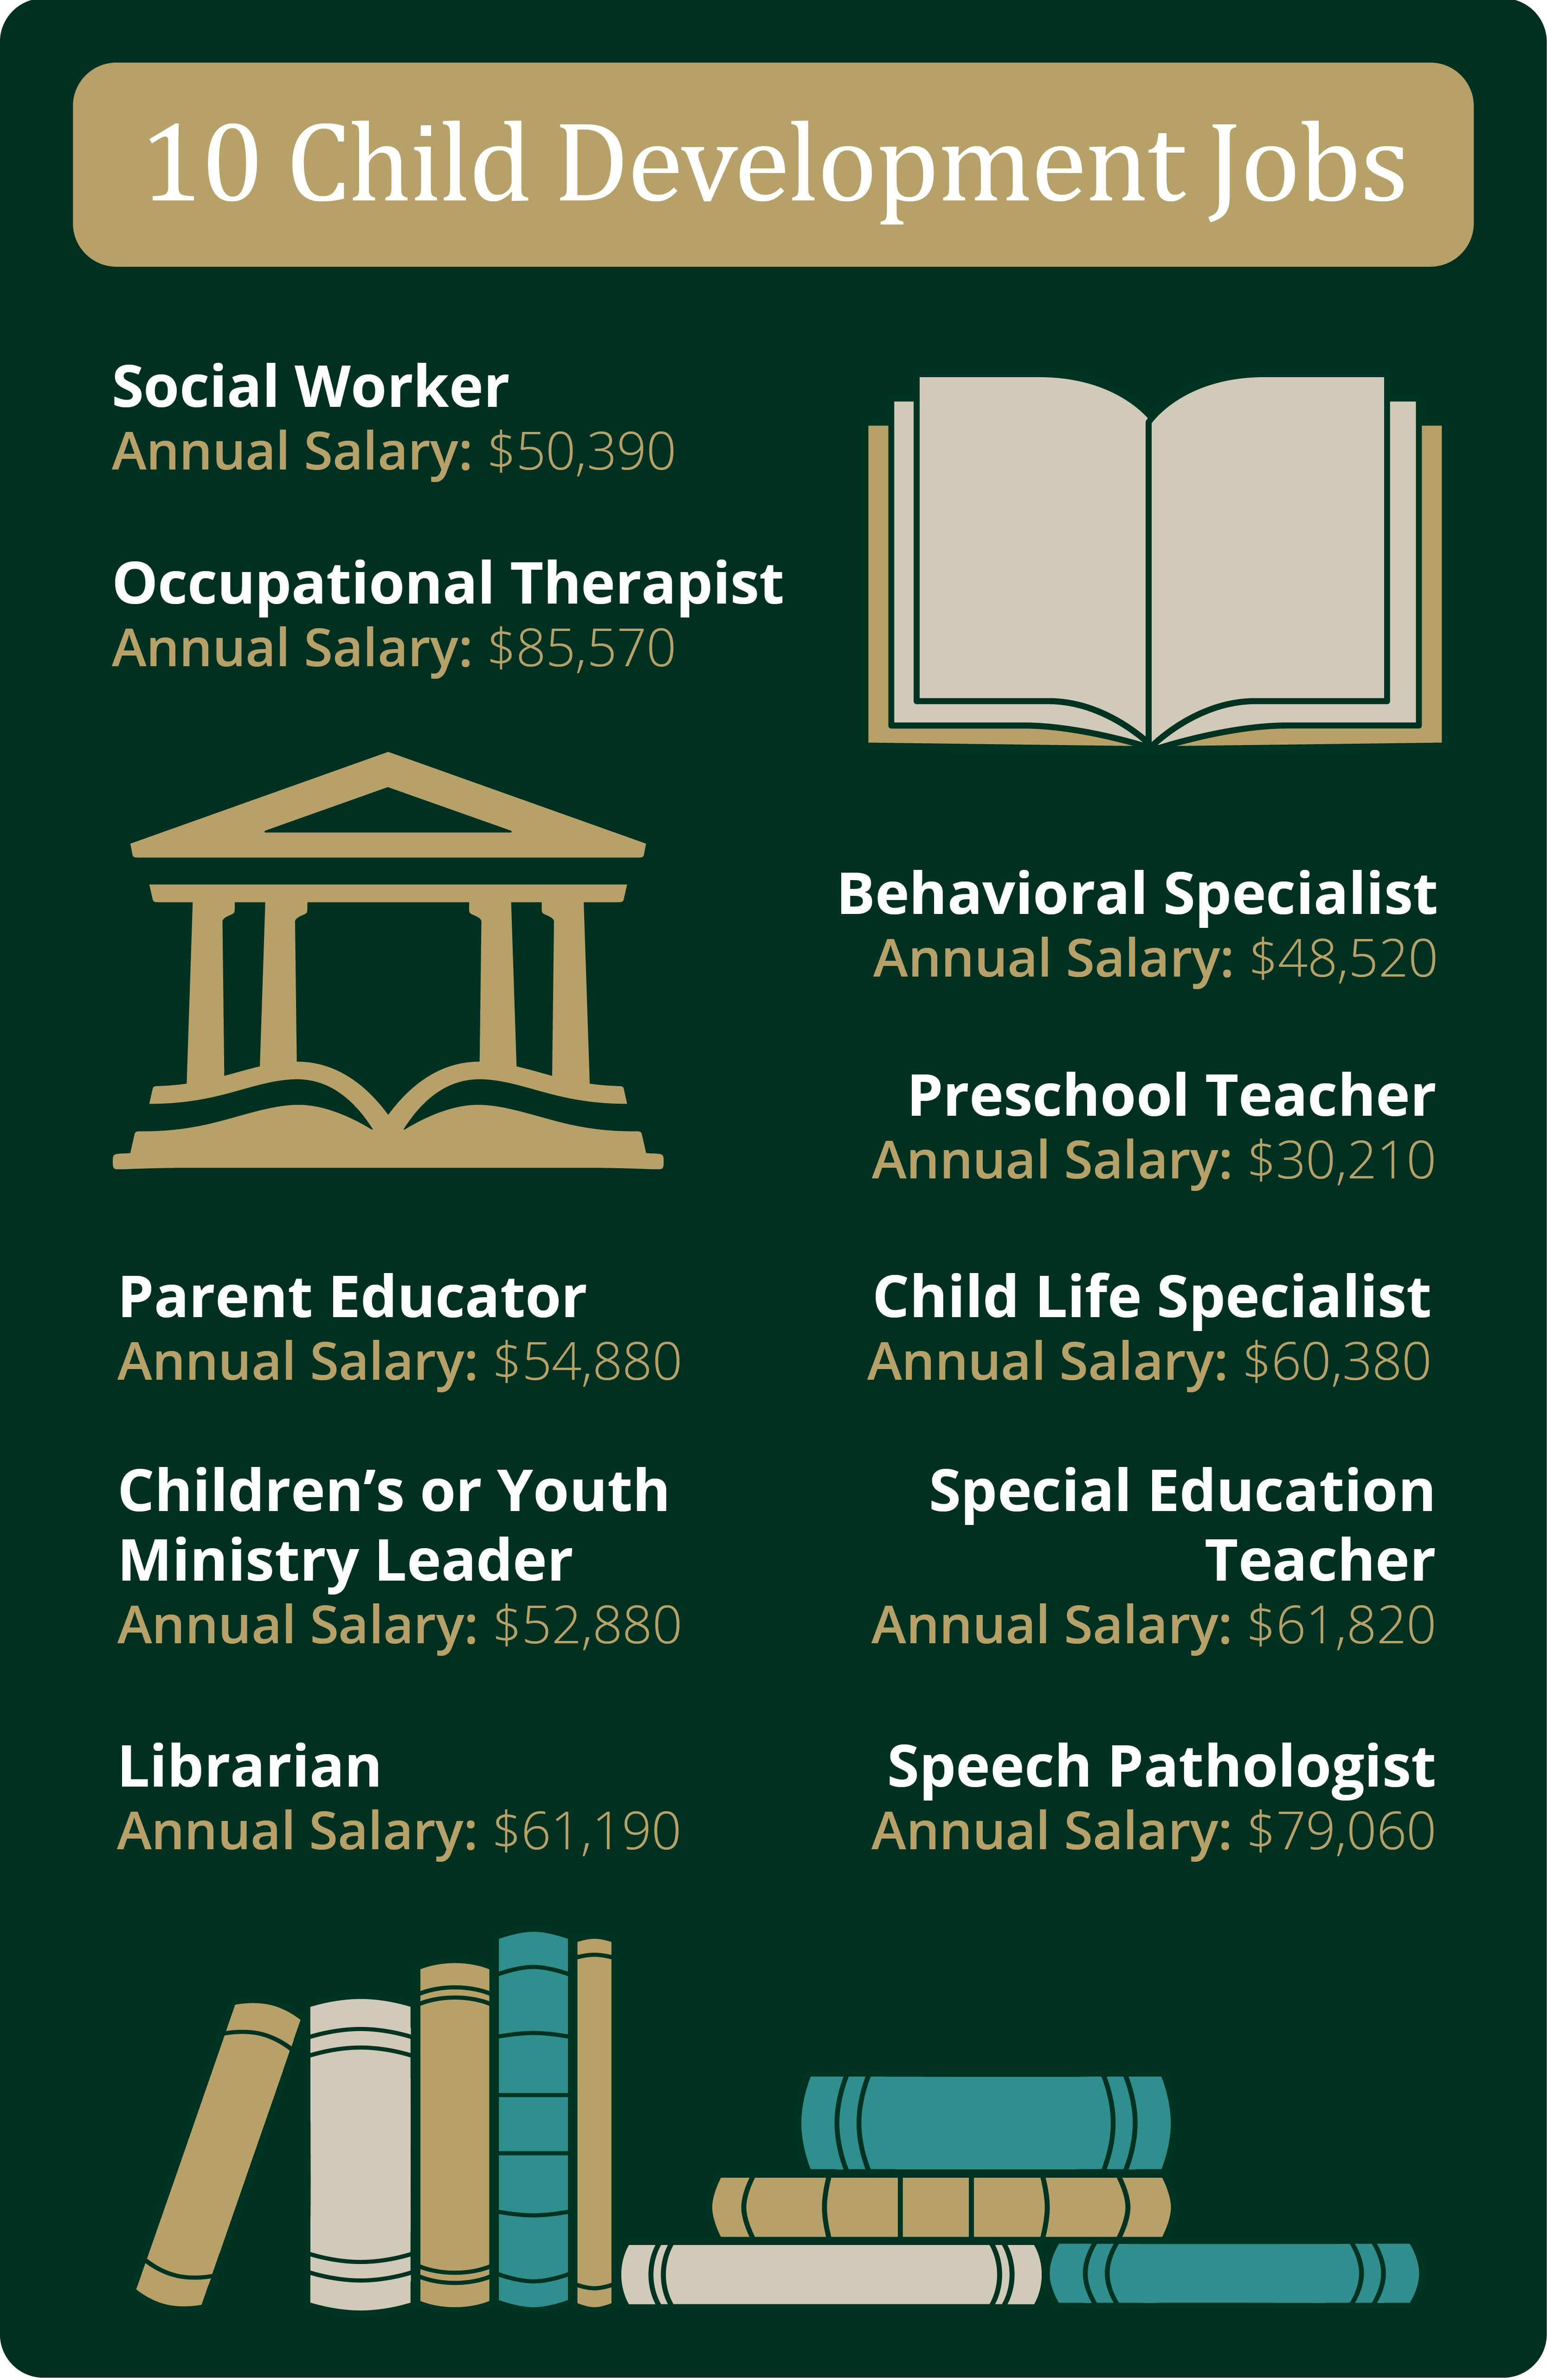 10 child development jobs: social worker, occupational therapist, behavioral specialist, preschool teacher, child life specialist, special education teacher, speech pathologist, parent educator, children's or youth ministry leader. Graphics of an open book and books stacked are on the top and bottom of the image. 